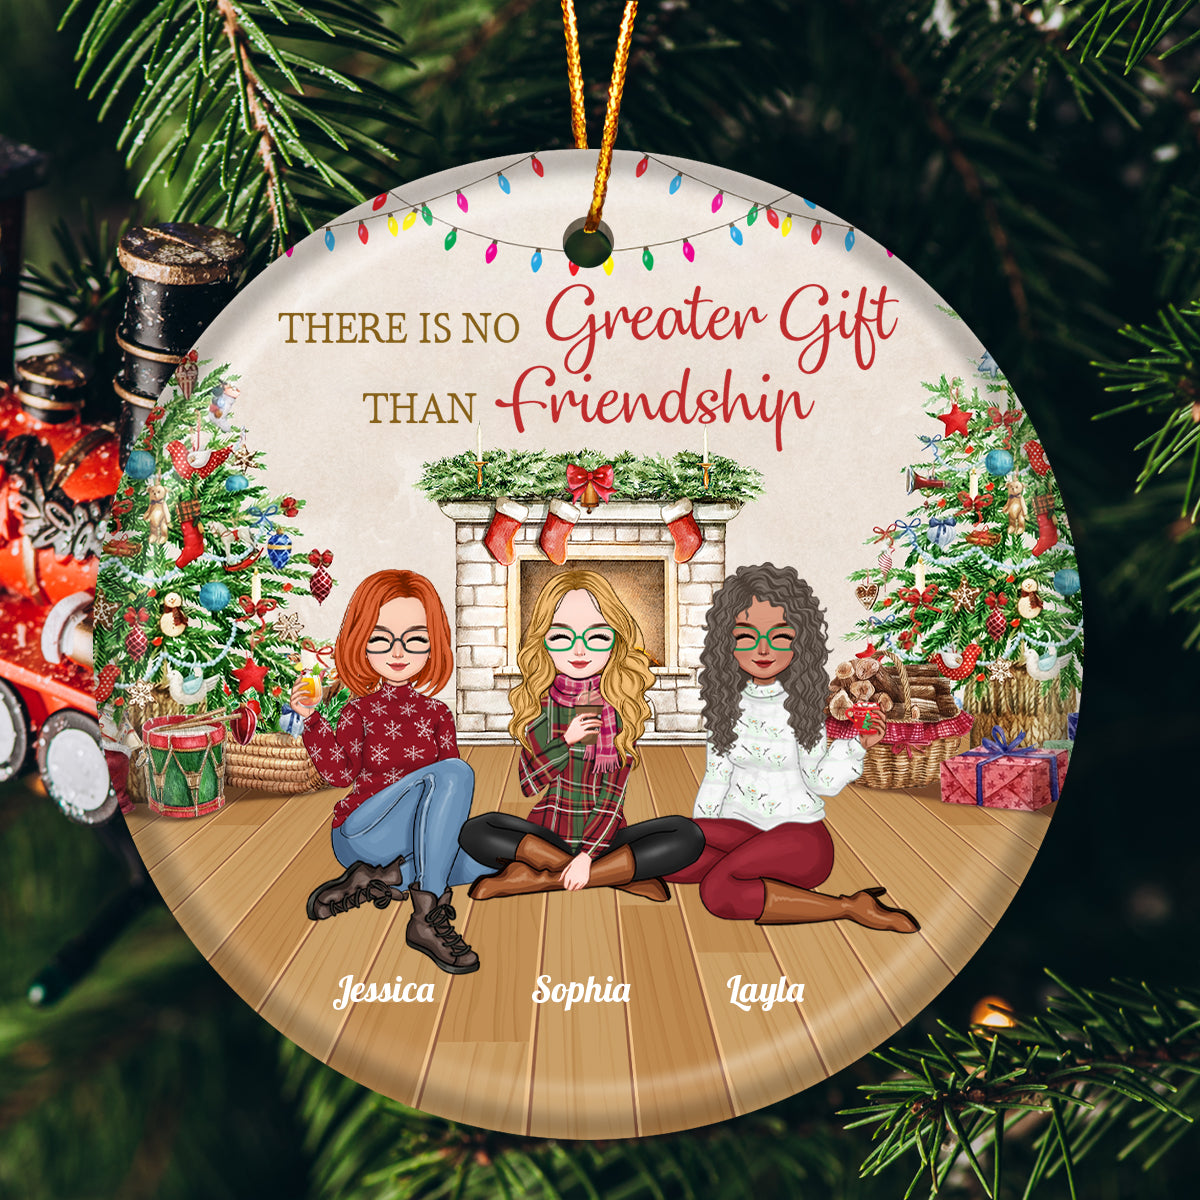 Friends - There is no greater gift than friendship - Personalized Ceramic Round Shaped